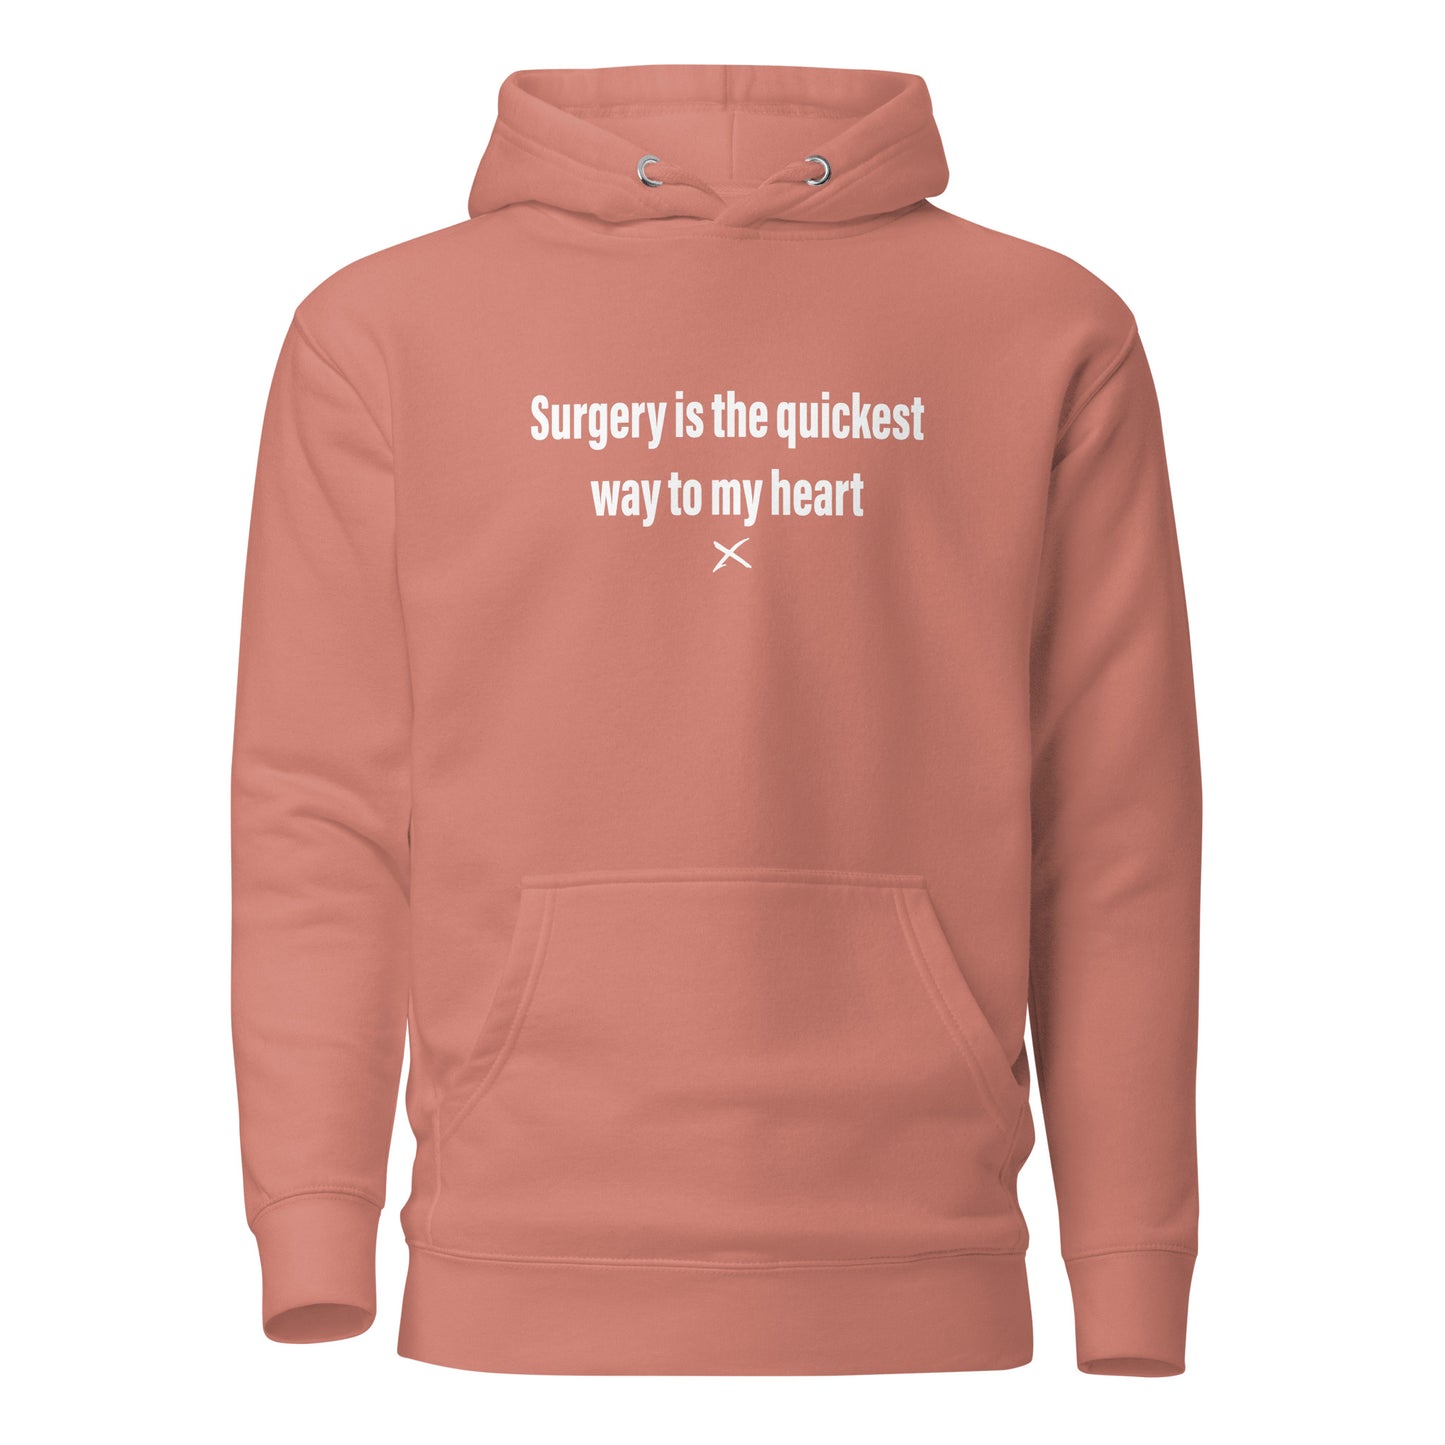 Surgery is the quickest way to my heart - Hoodie